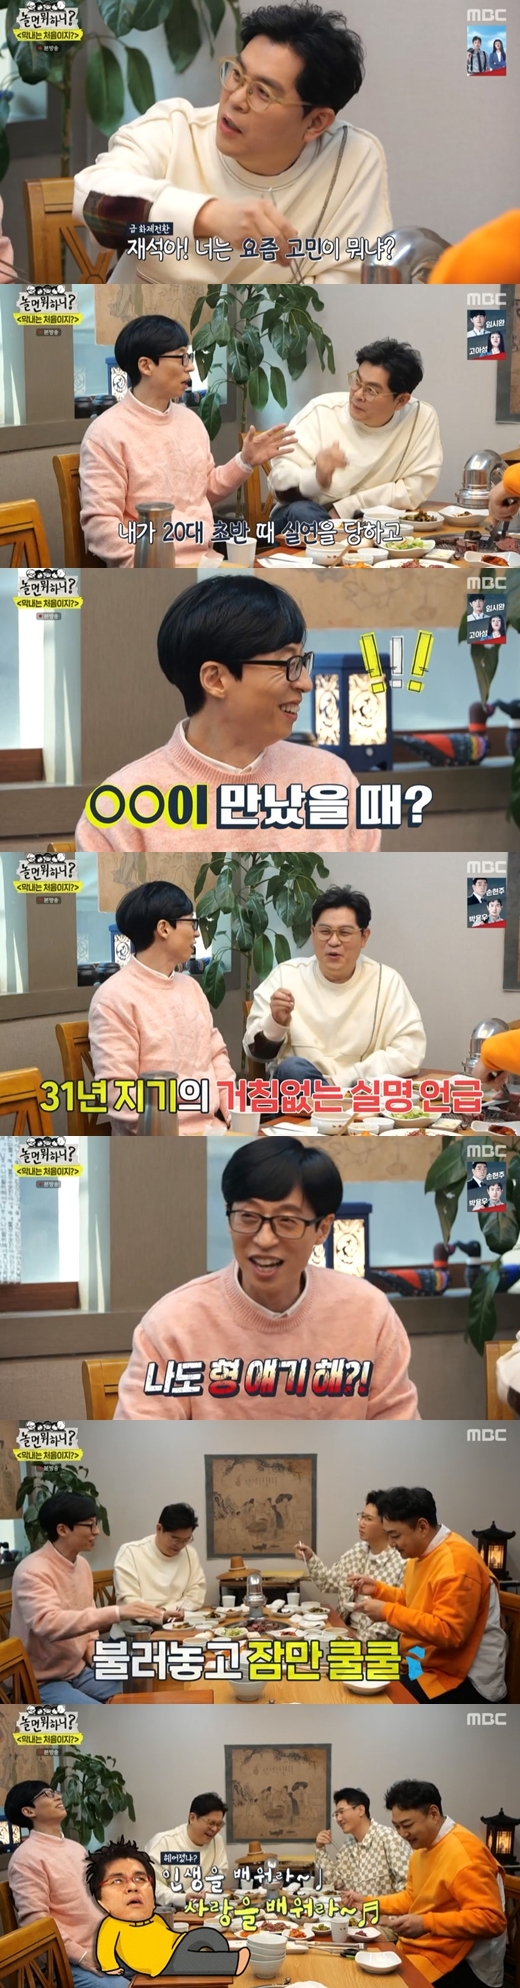 Comedian Yoo Jae-Suk introduced past episodes.MBC Hangout with Yo broadcast on the 26th, Joe Dong Ari Yoo Jae-Suk, Jin Yongman, Ji Seok Jin and Kim Su-yong were drawn.Jin Yongman said, What are you worried about these days? Then Yoo Jae-Suk said, I was in my early 20s and I was so sick that I had no place to go.Yongman called his brother and told him to come home. When he went, he woke up and said, Learn your life, Learn your love, and I was hurt by my indifferent brothers.In this process, Jin Yongman mentioned the real name of his lover who had a relationship with Yoo Jae-Suk, and Yoo Jae-Suk was angry that I also talk about my brother.